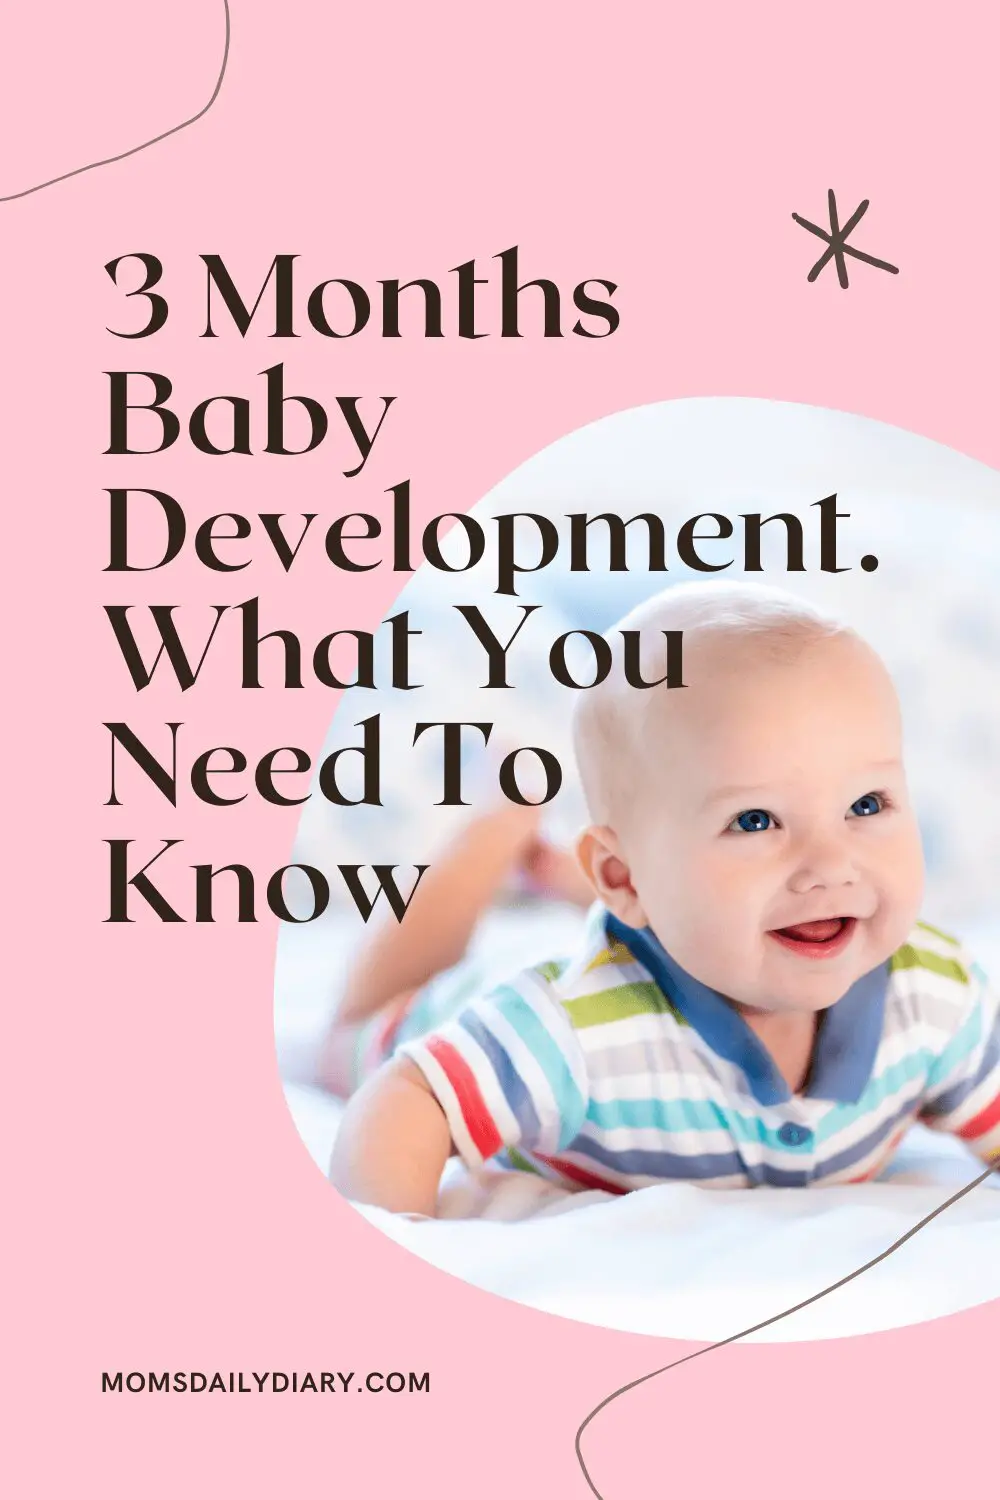 As part of the 3 months baby development, your cutie is now more aware of themselves and their surroundings. Check out what's new this month.